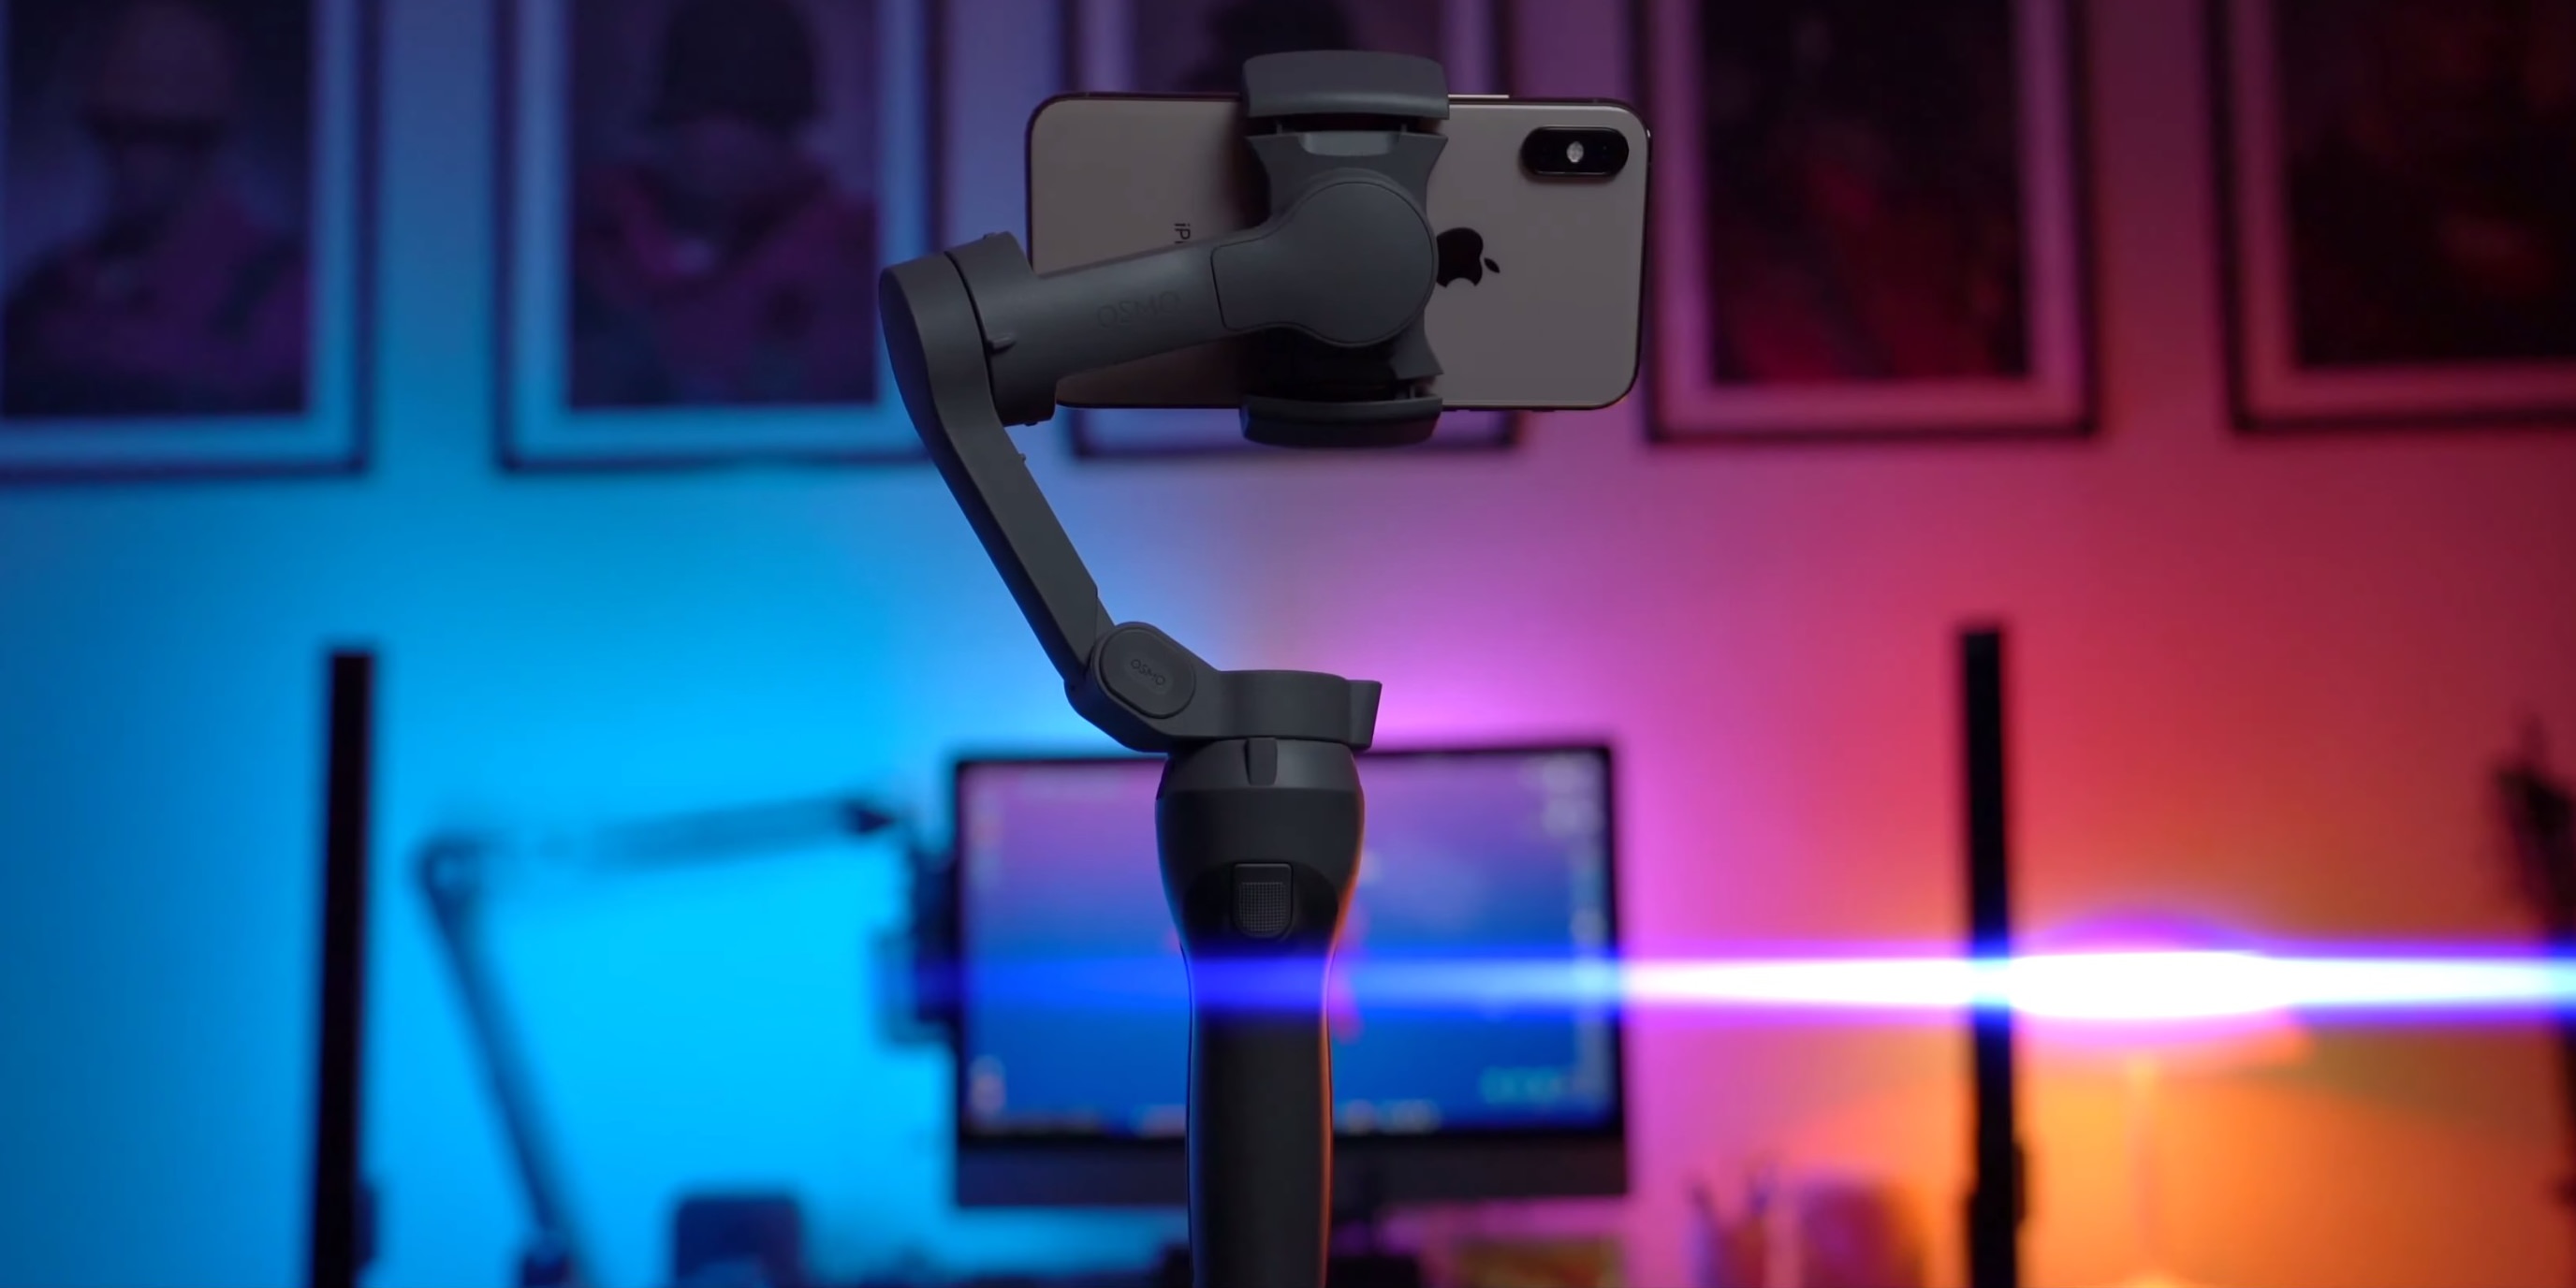 DJI Osmo Mobile 3 video this one - DroneDJ